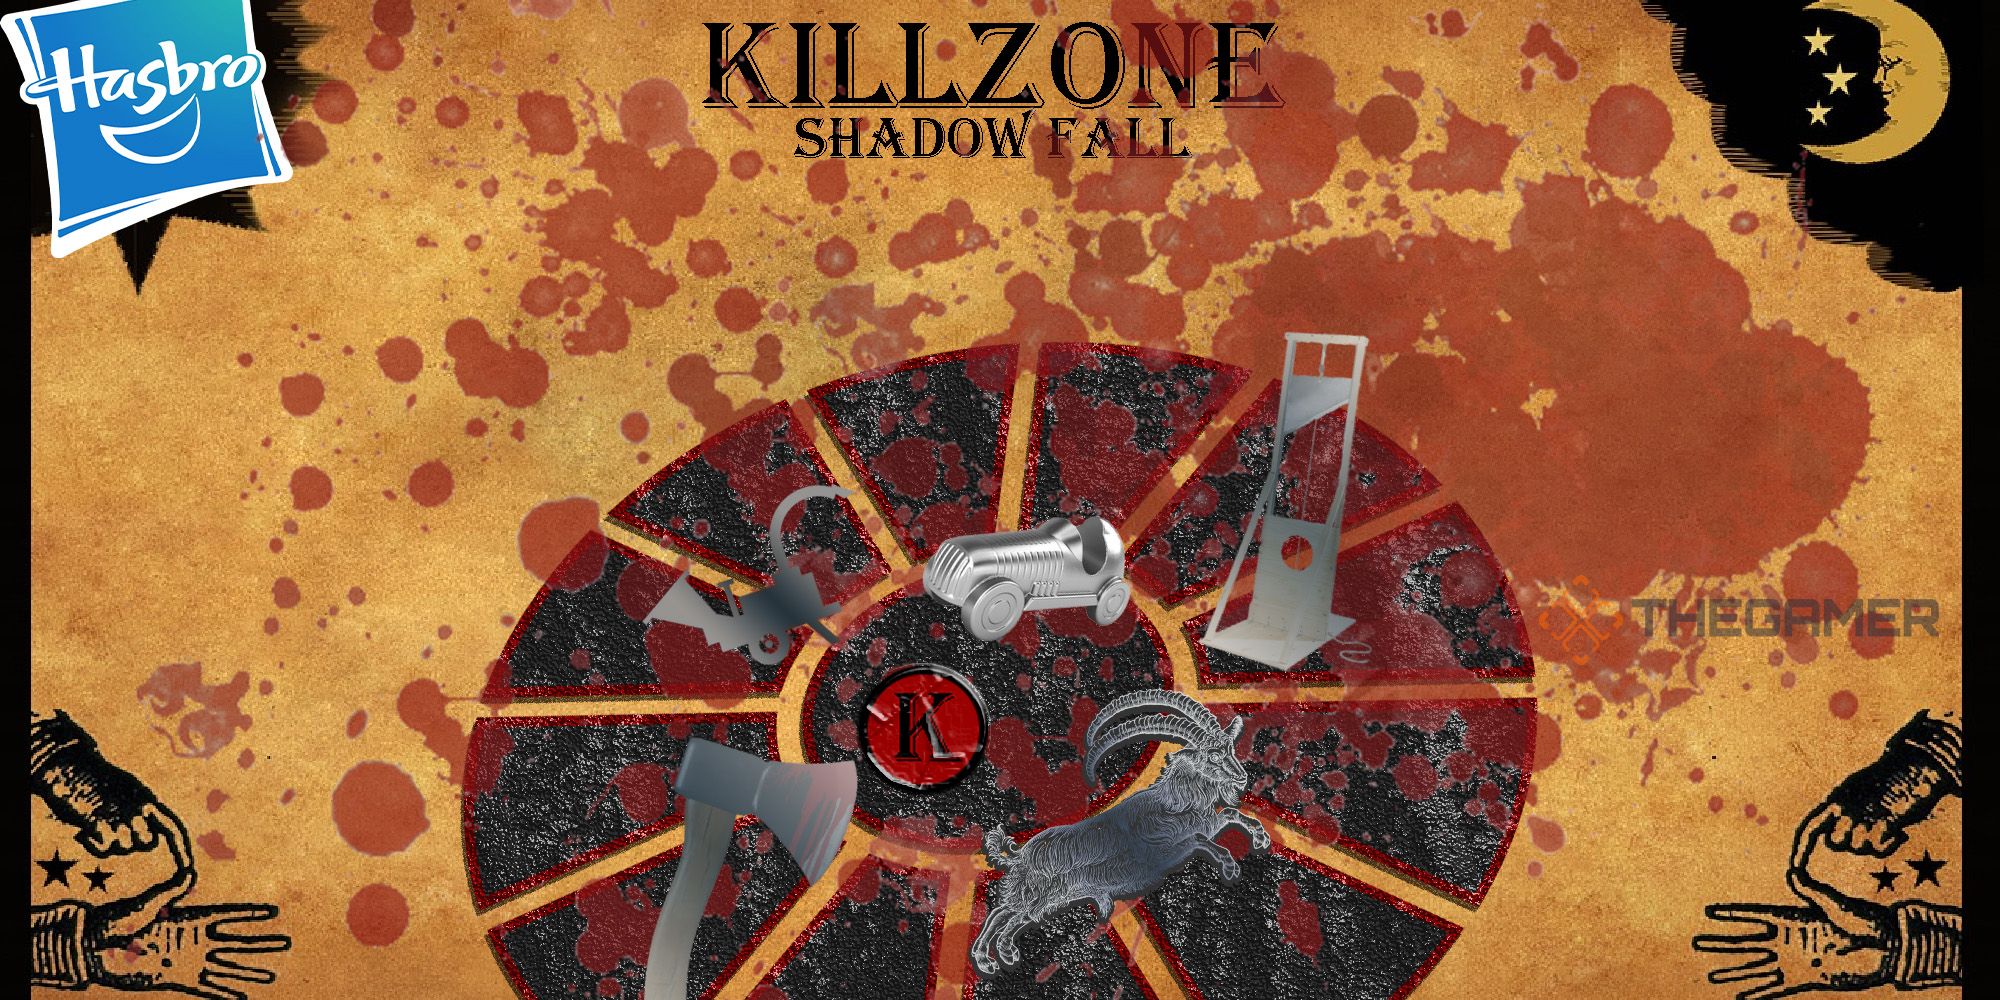 A bloodied game board for the fake Hasbro board game, Killzone: Shadow Fall. This board has game pieces representing a wood chipper, guillotine, axe, sacrificial goat, and car atop a spinny wheel of death.